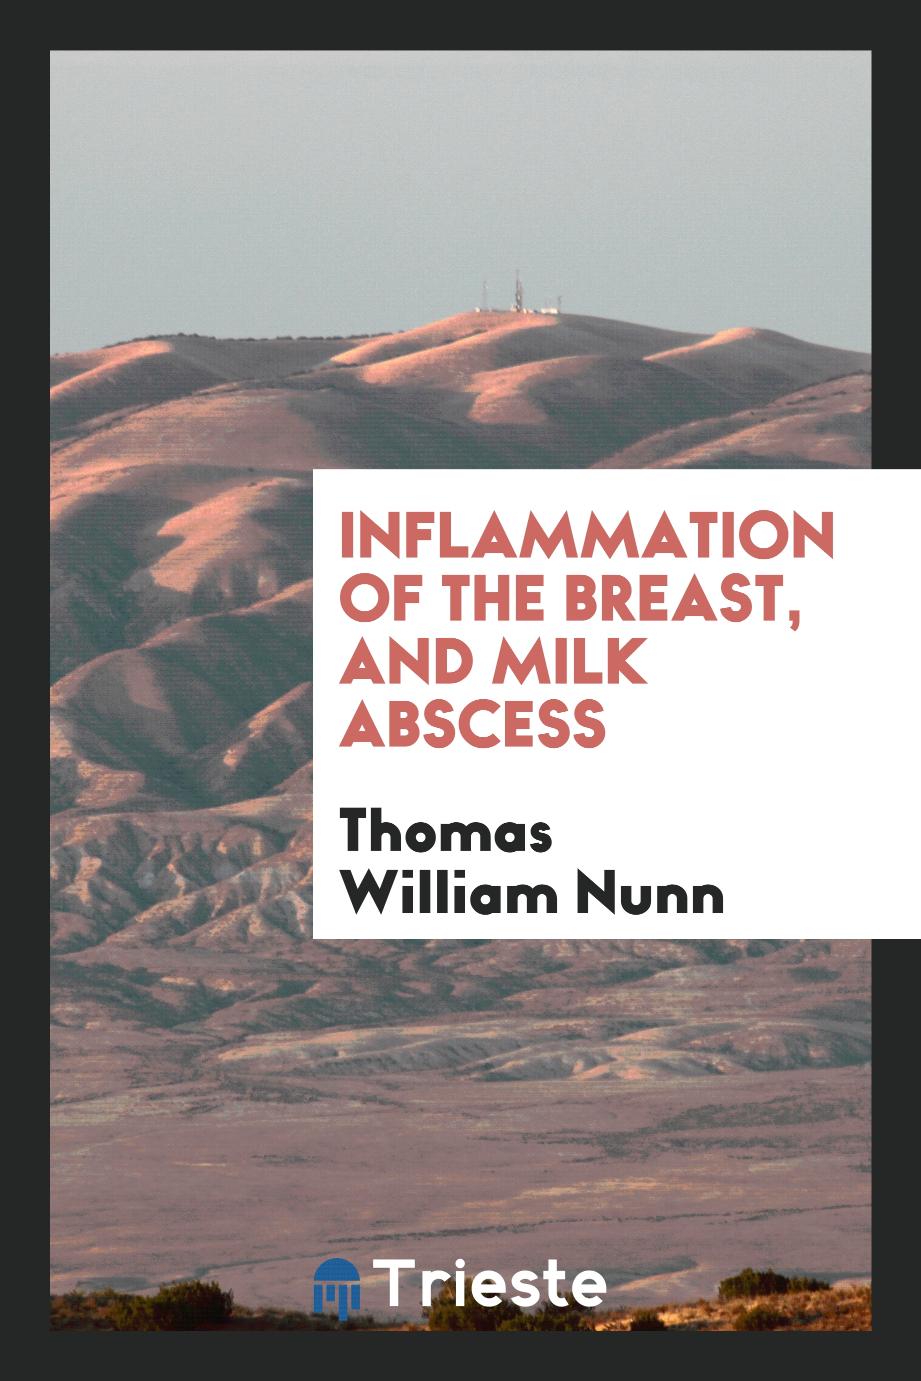 Inflammation of the breast, and milk abscess